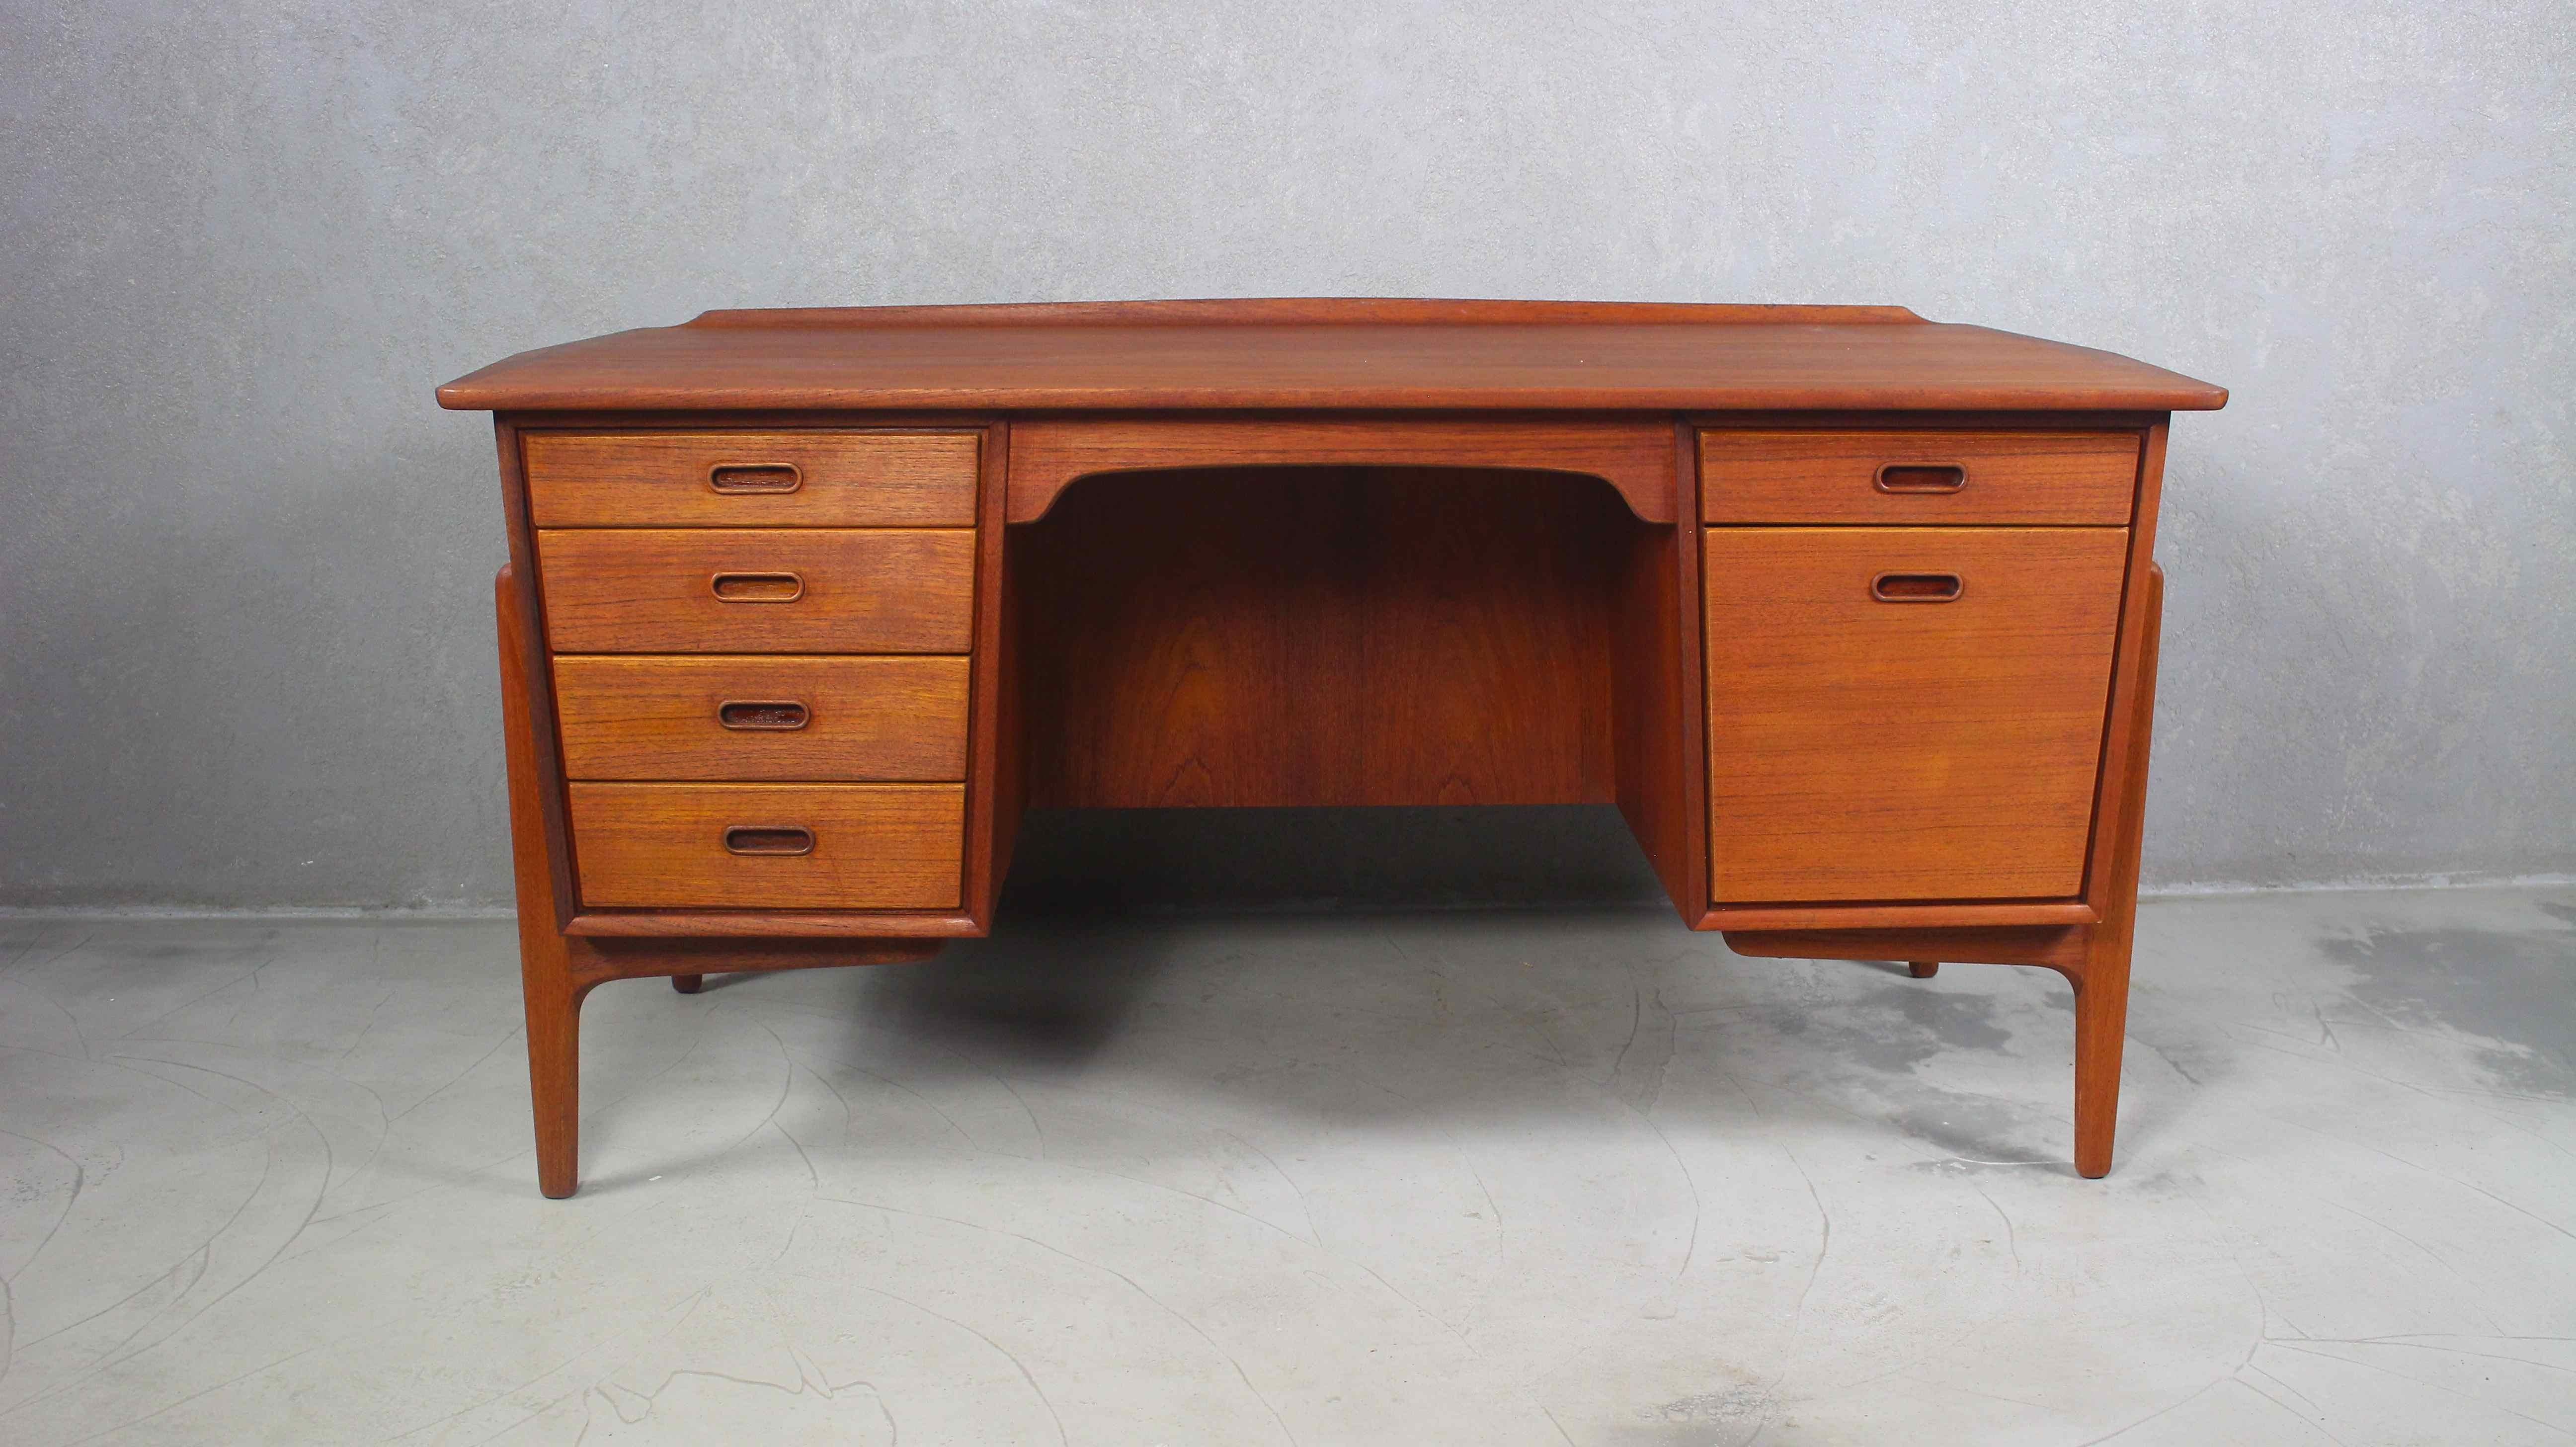 This teak writing desk was designed by Svend Aage Madsen for Sigurd Hansen, Denmark 1960s.
It features four drawers on the left side and one drawer and a cabinet on the right side.
On the backside is a large cabinet with a shelf which makes it